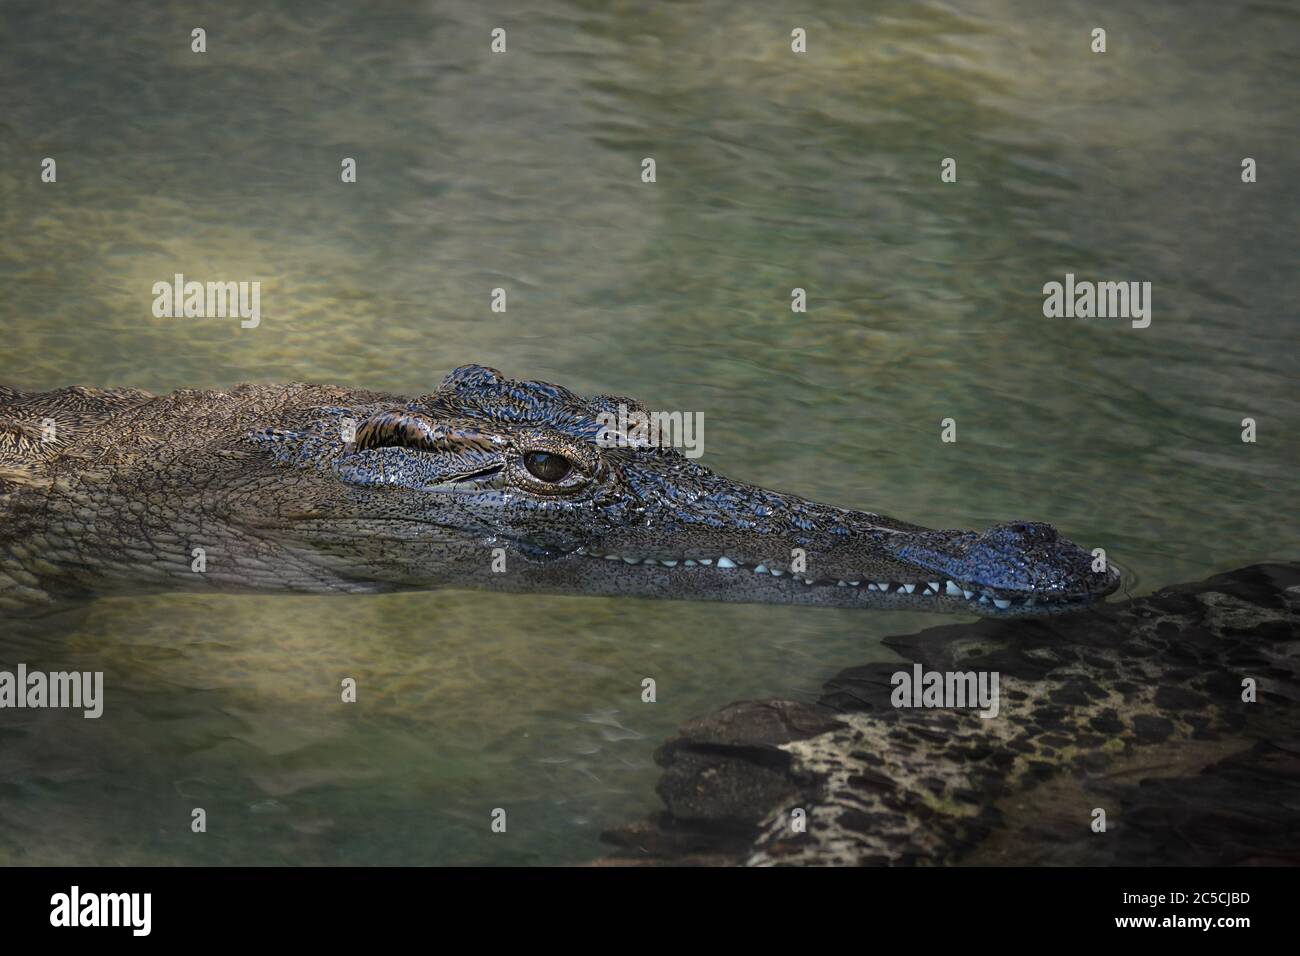 Small crocodile with sharp teeth cooling in clear water Stock Photo